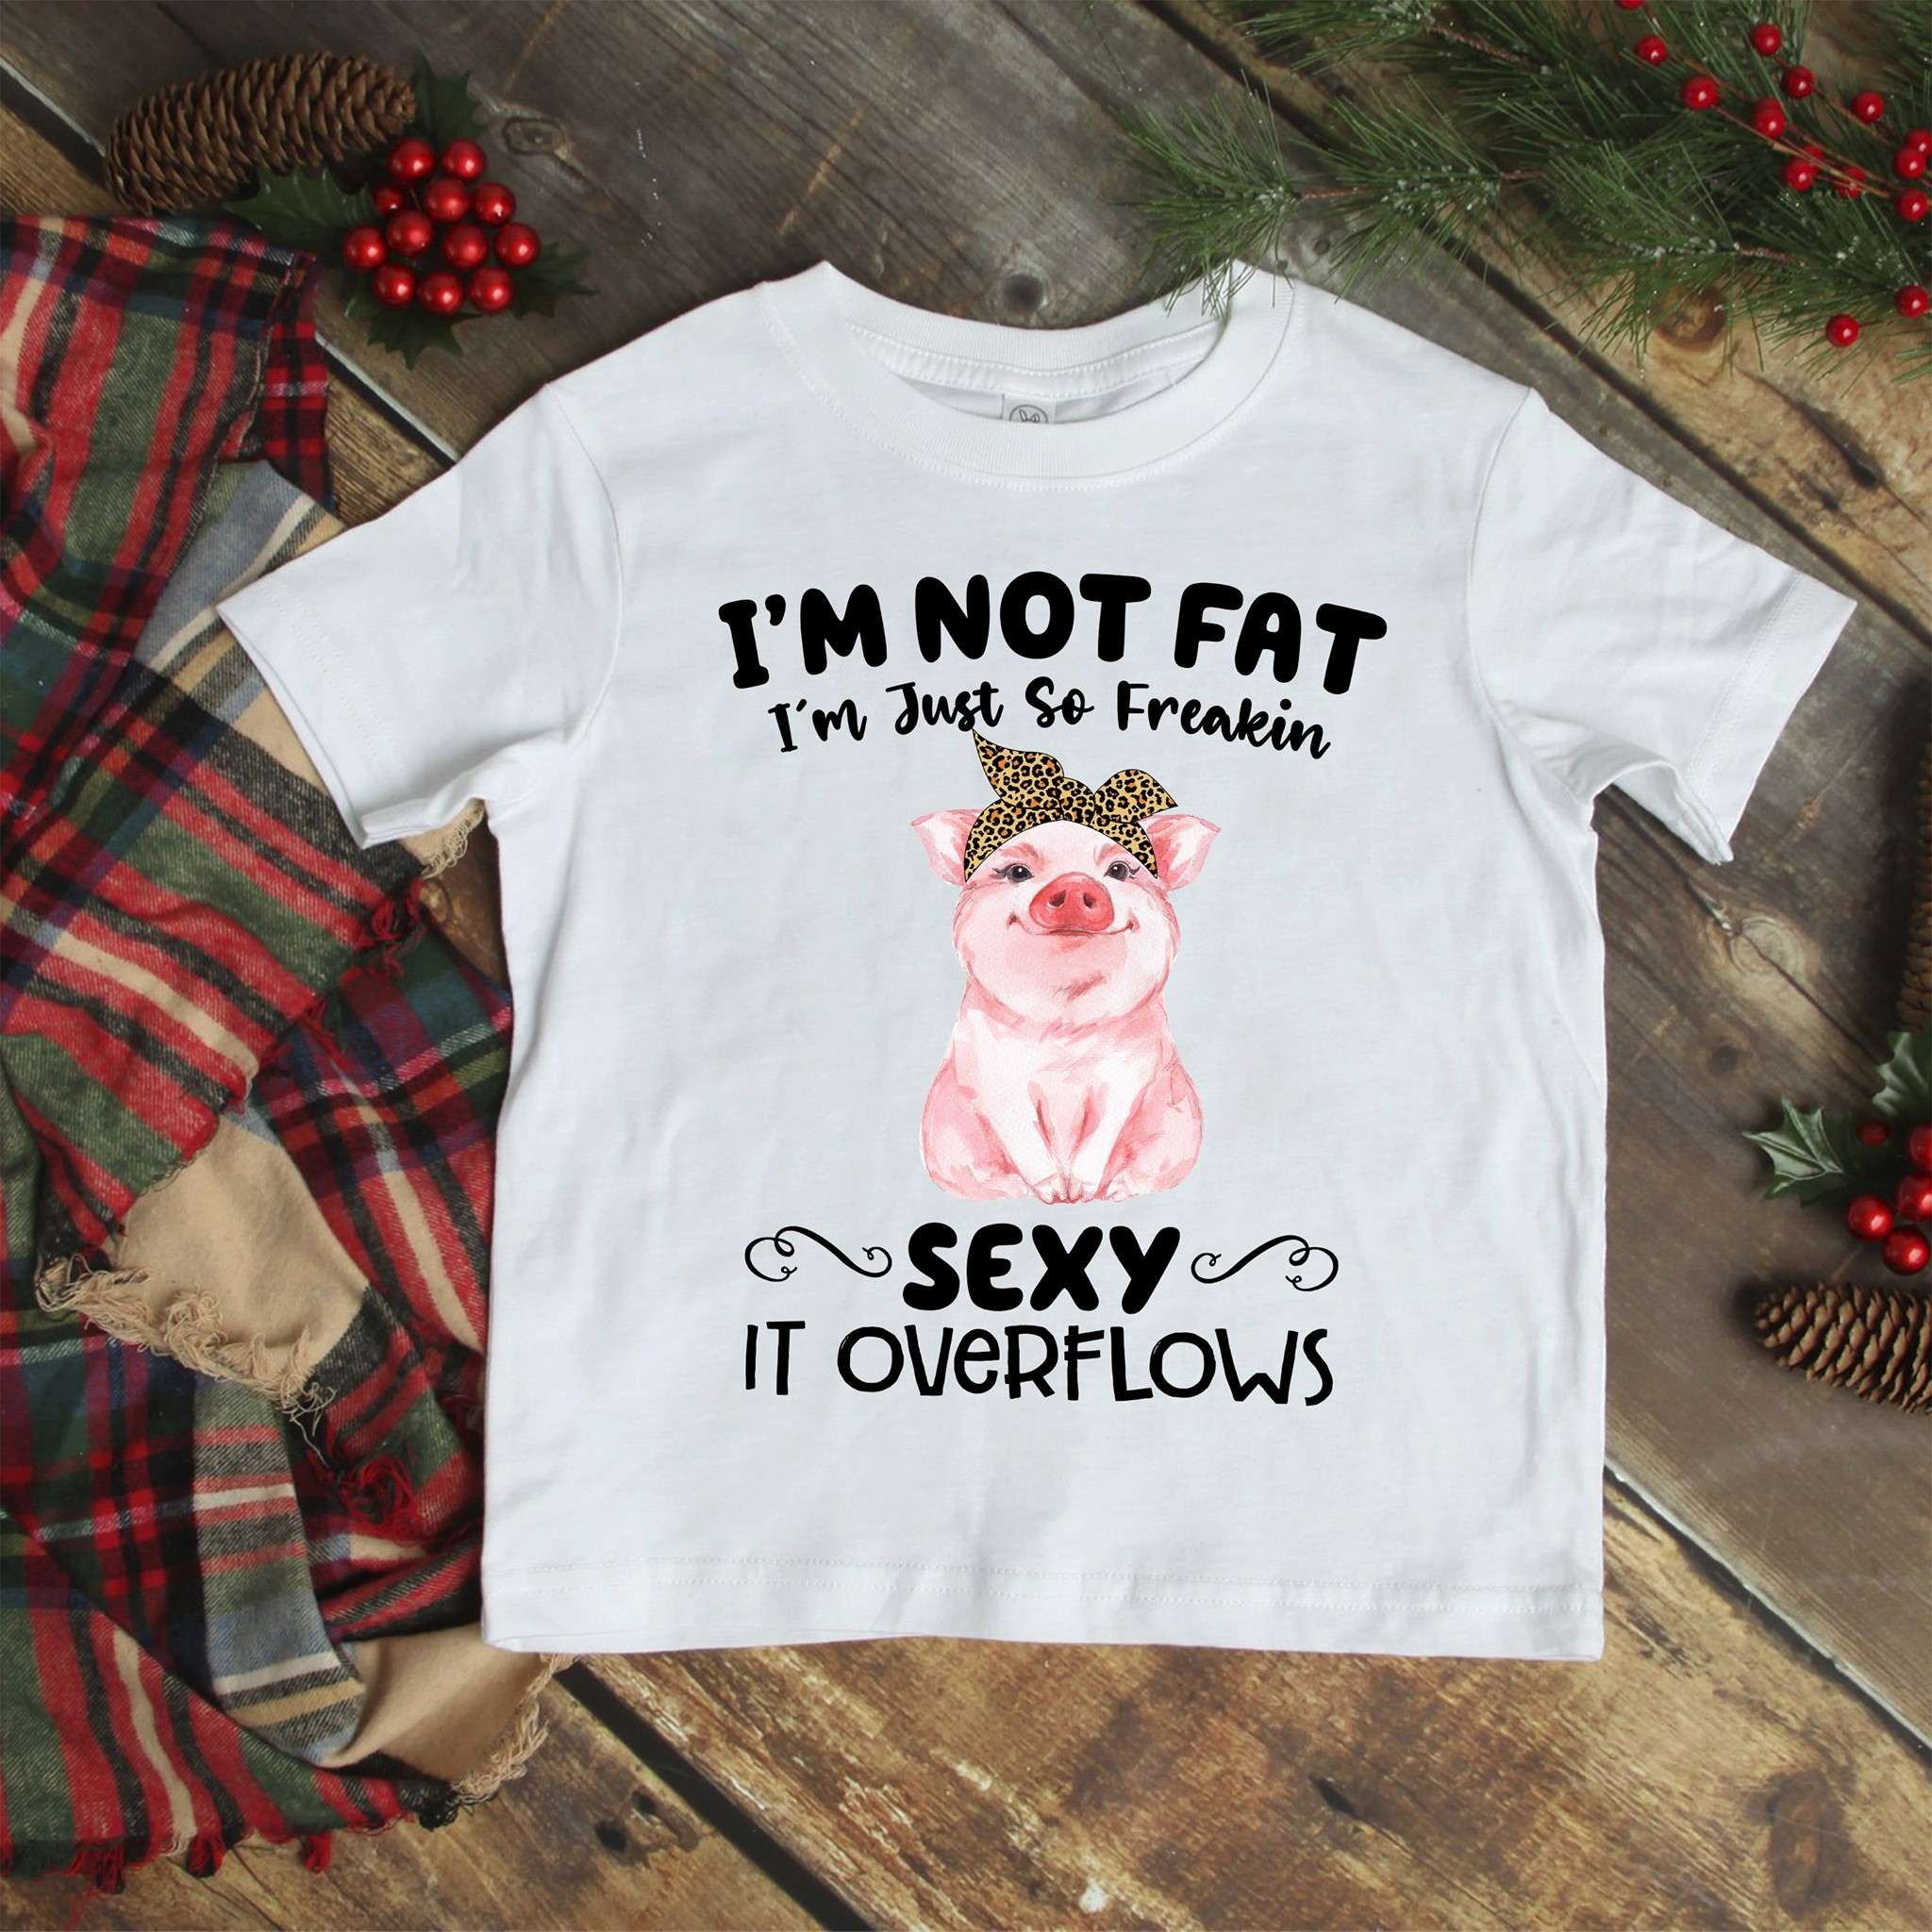 I'm not fat I'm just so freakin sexy it overflows - Gorgeous pig, pig animal lover